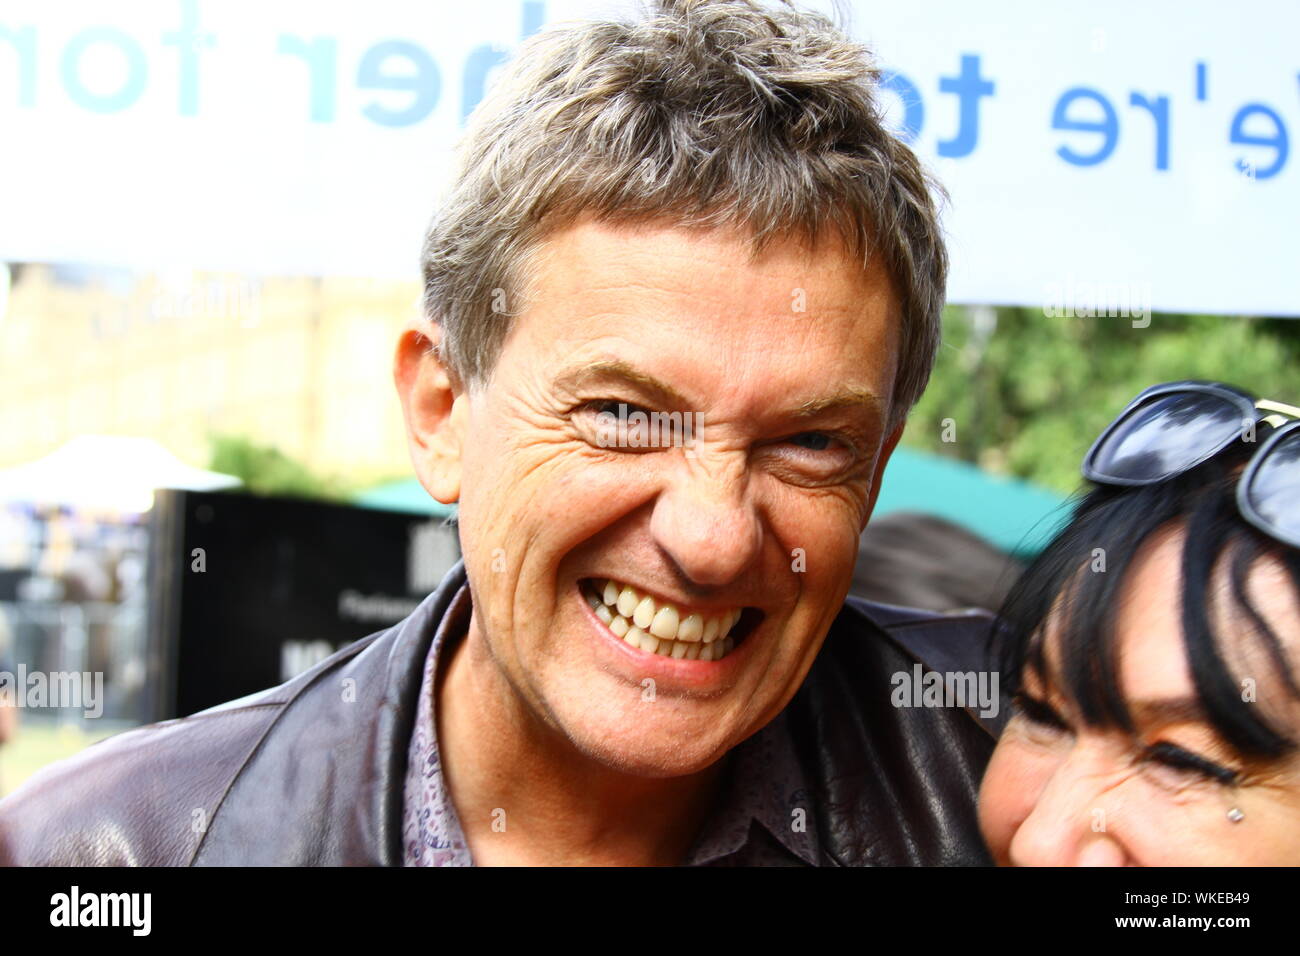 MATTHEW WRIGHT RADIO PRESENTER FOR TALK RADIO PICTURED AT COLLEGE GREEN,  WESTMINSTER, LONDON, UK ON THE 3RD SEPTEMBER 2019. THE WRIGHT STUFF TV SHOW.  TELEVISION PRESENTER. ALEXANDER MATTHEW WRIGHT. MATHEW WRIGHT Stock